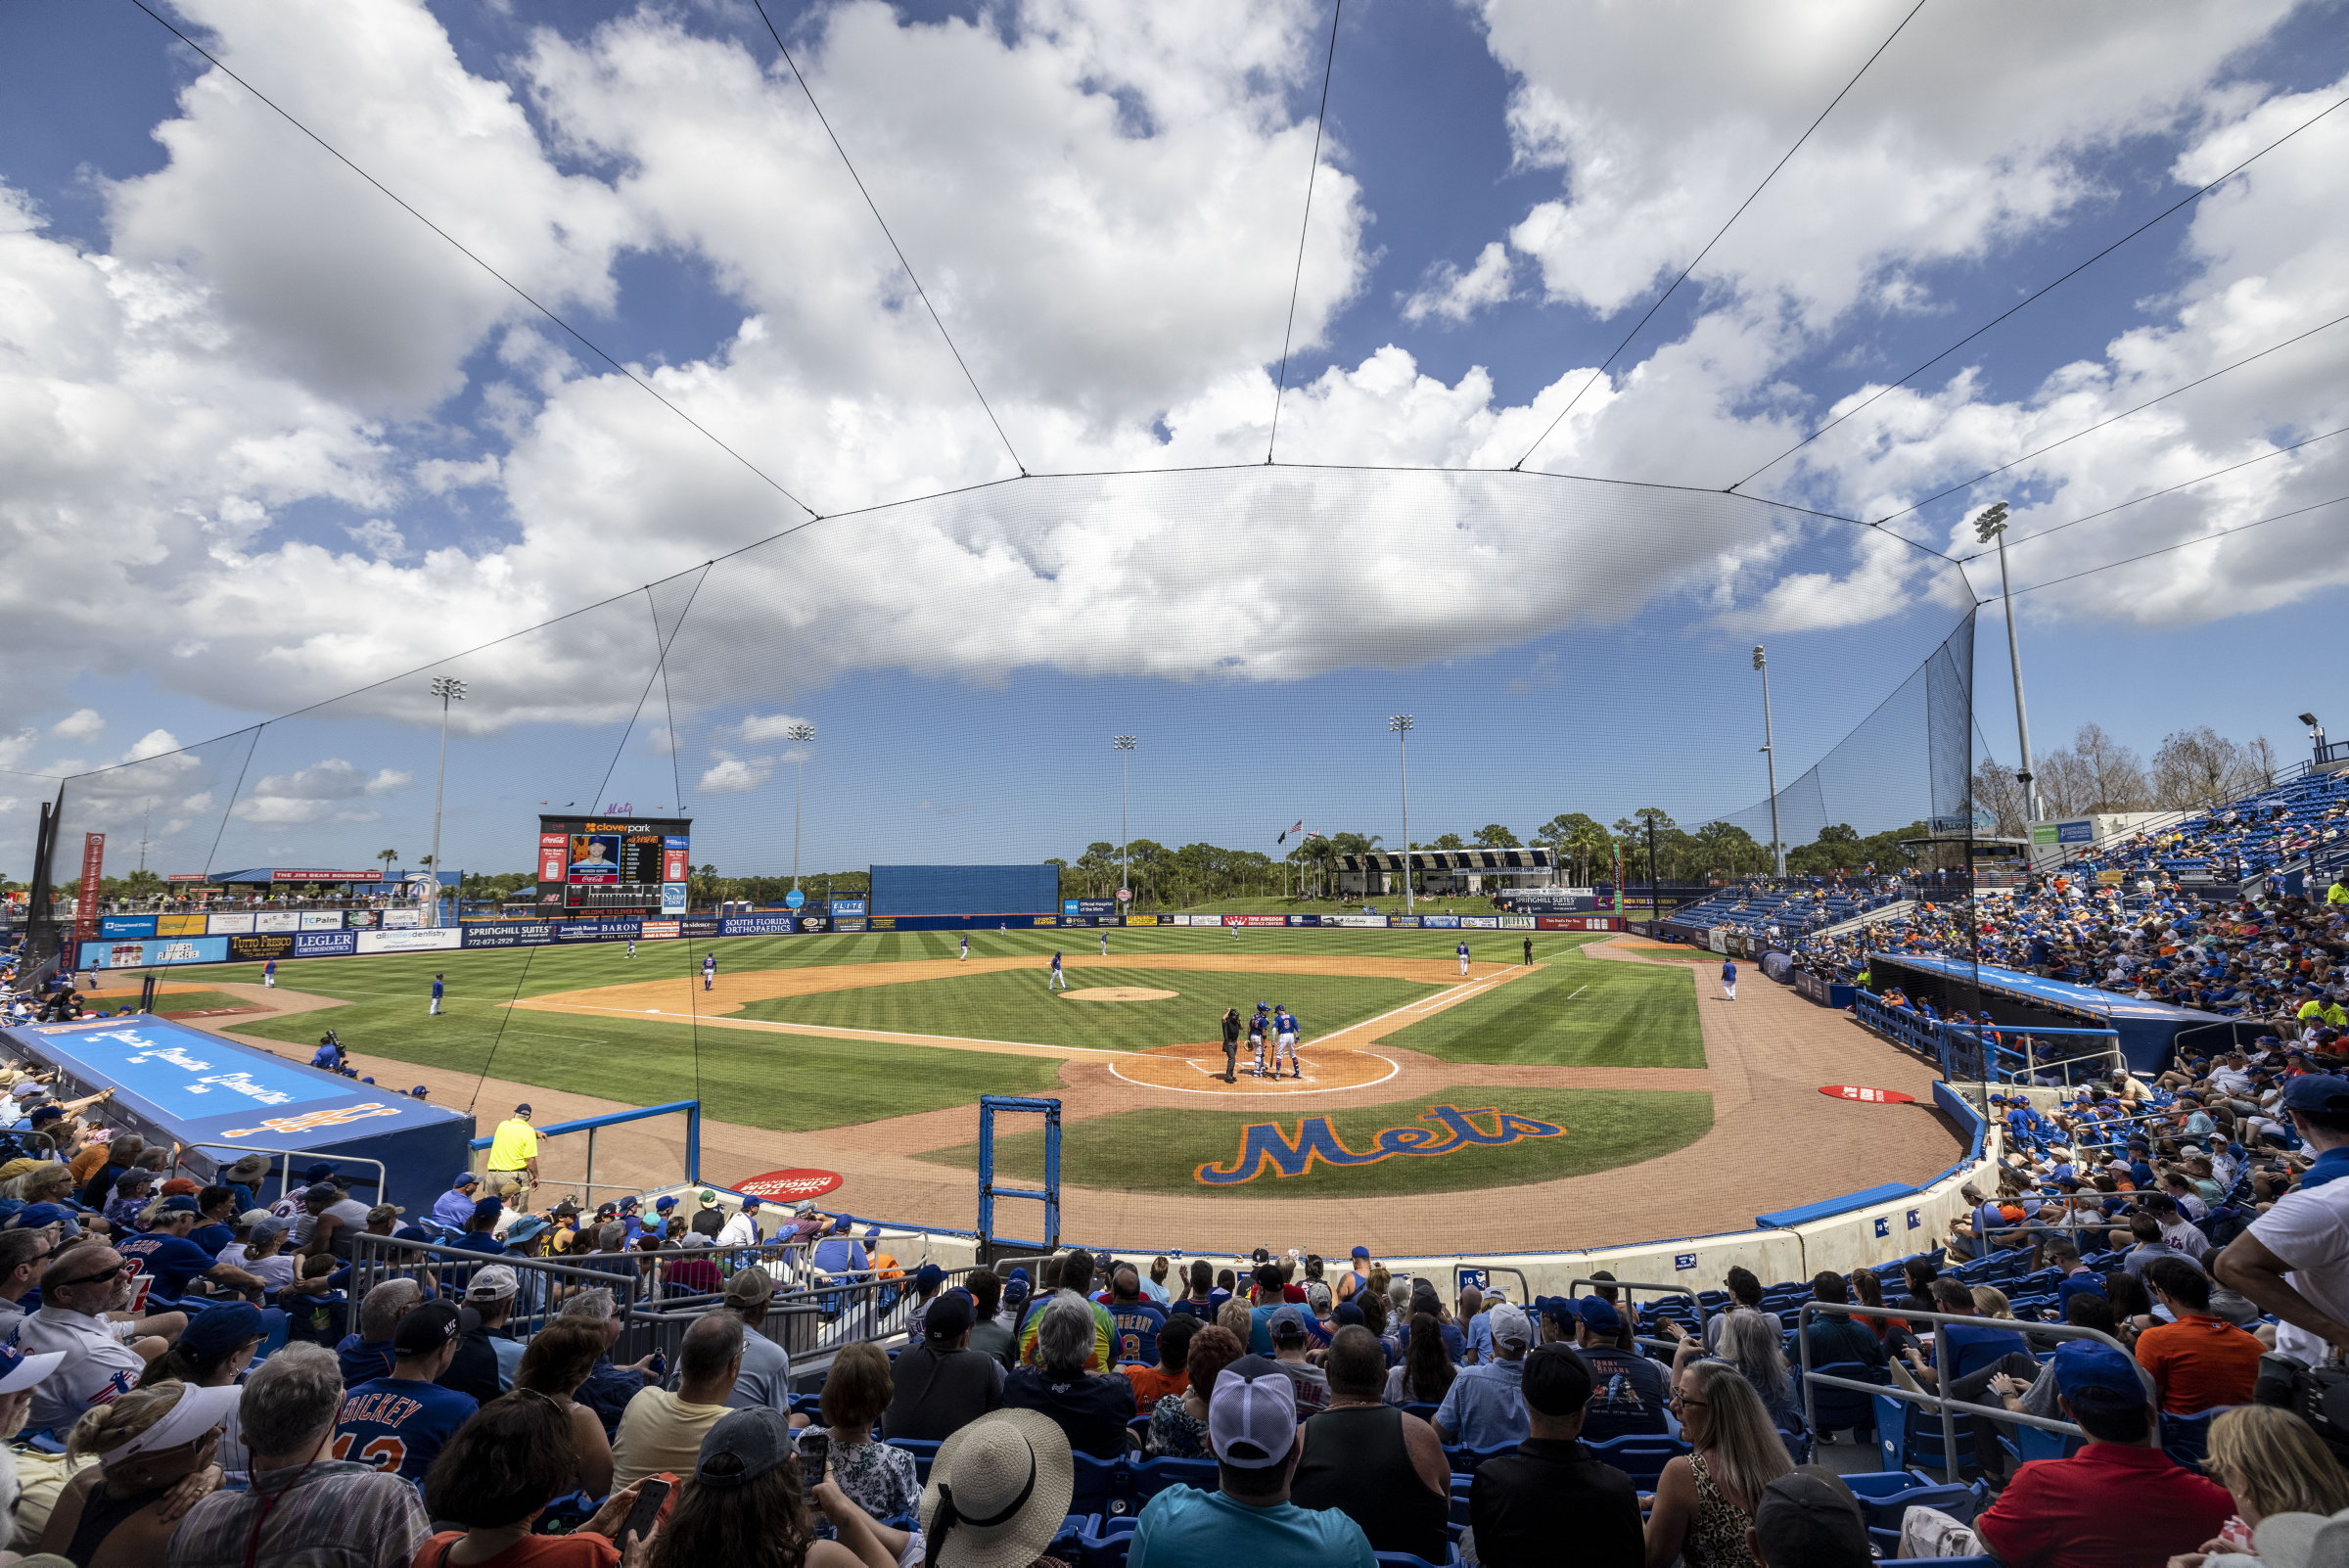 New York Mets’ fans attend a free intra-squad game at Clover Park in Port St. Lucie, Florida